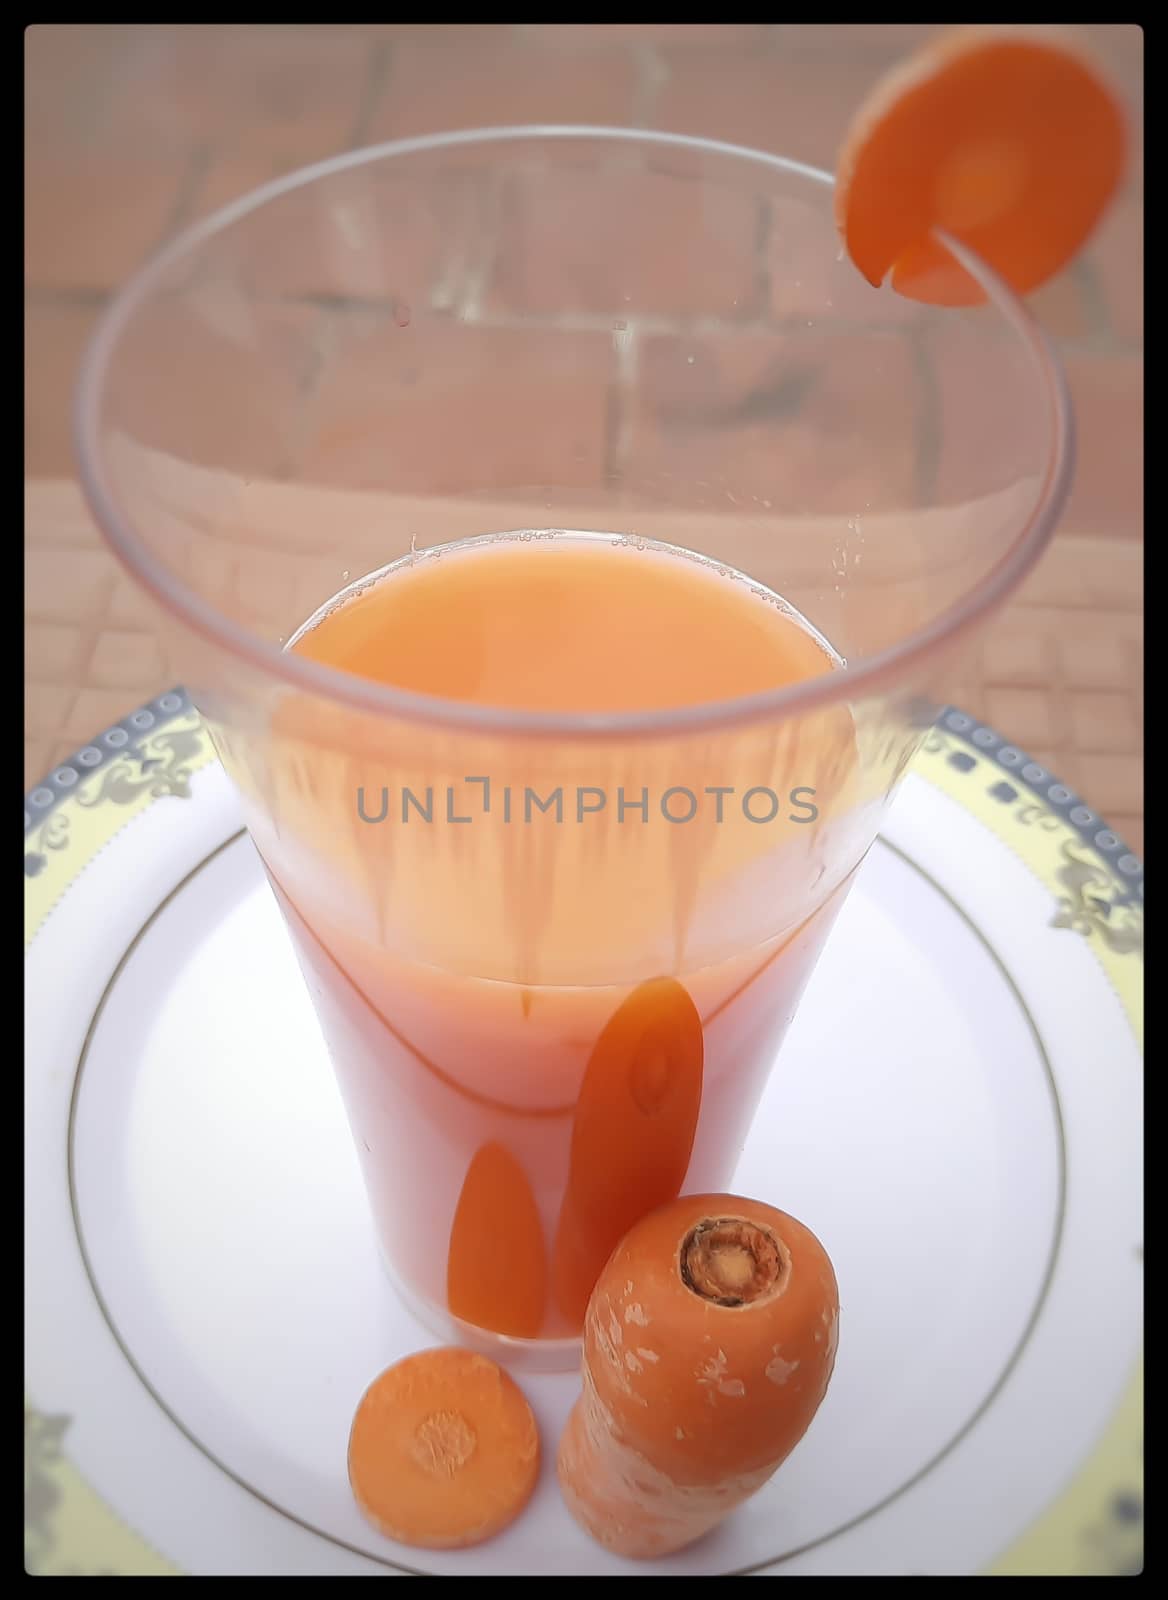 carrot juice ABC juice to blemishes black spots acne or pimples and even blackheads Vitamin A antioxidant